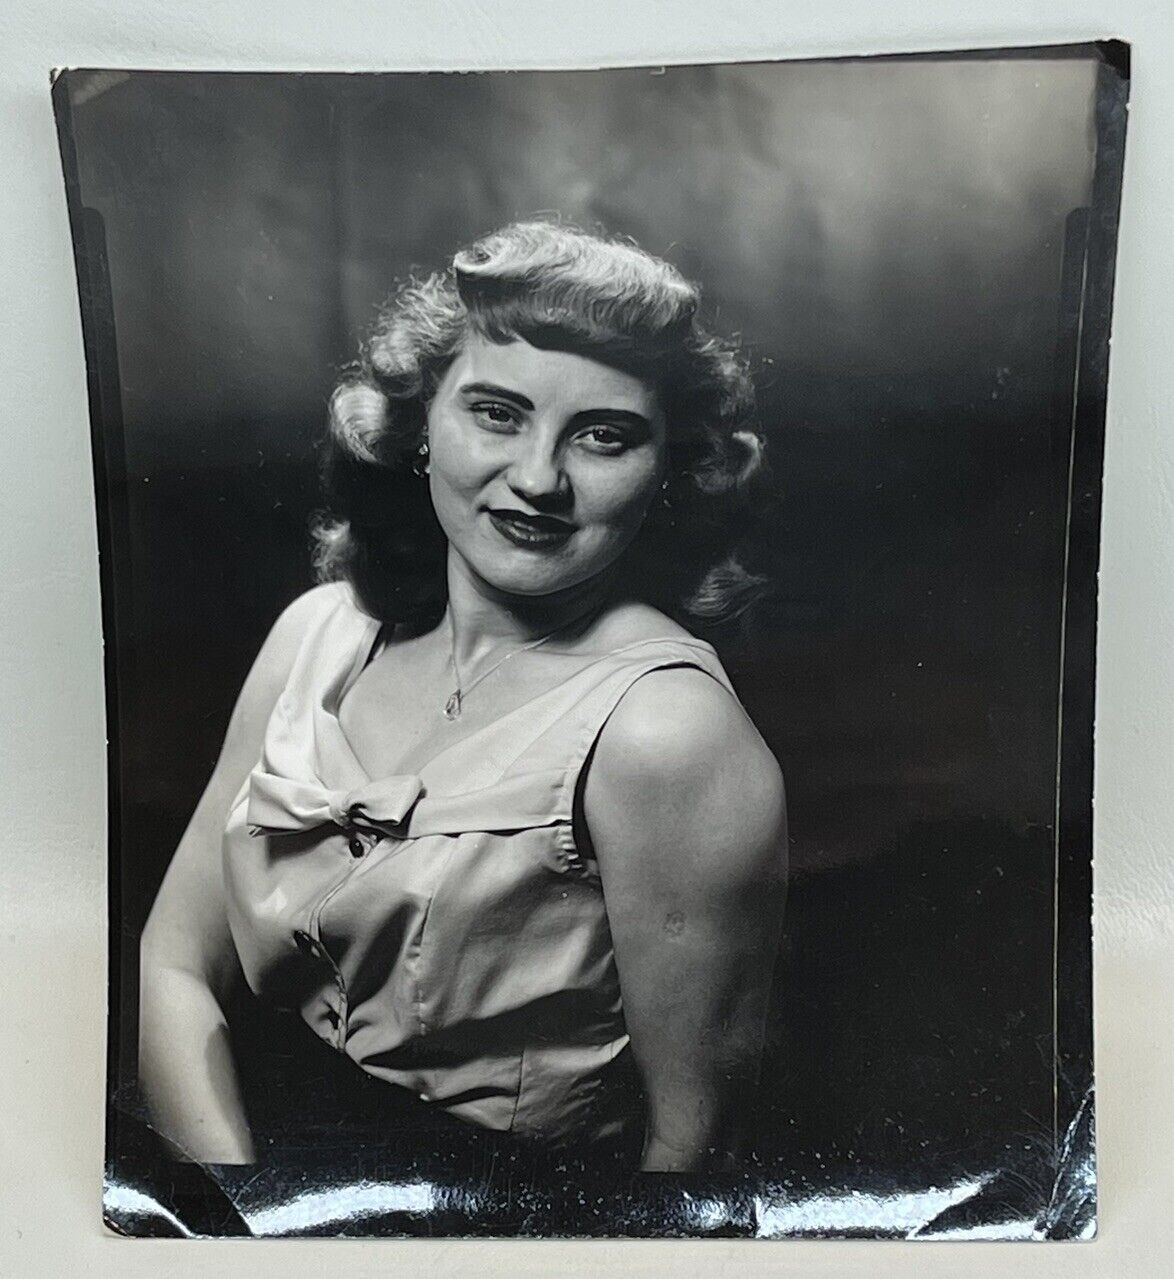 Vtg 1950s Photo Beautiful Woman Betty Bangs Curls Sultry Pose